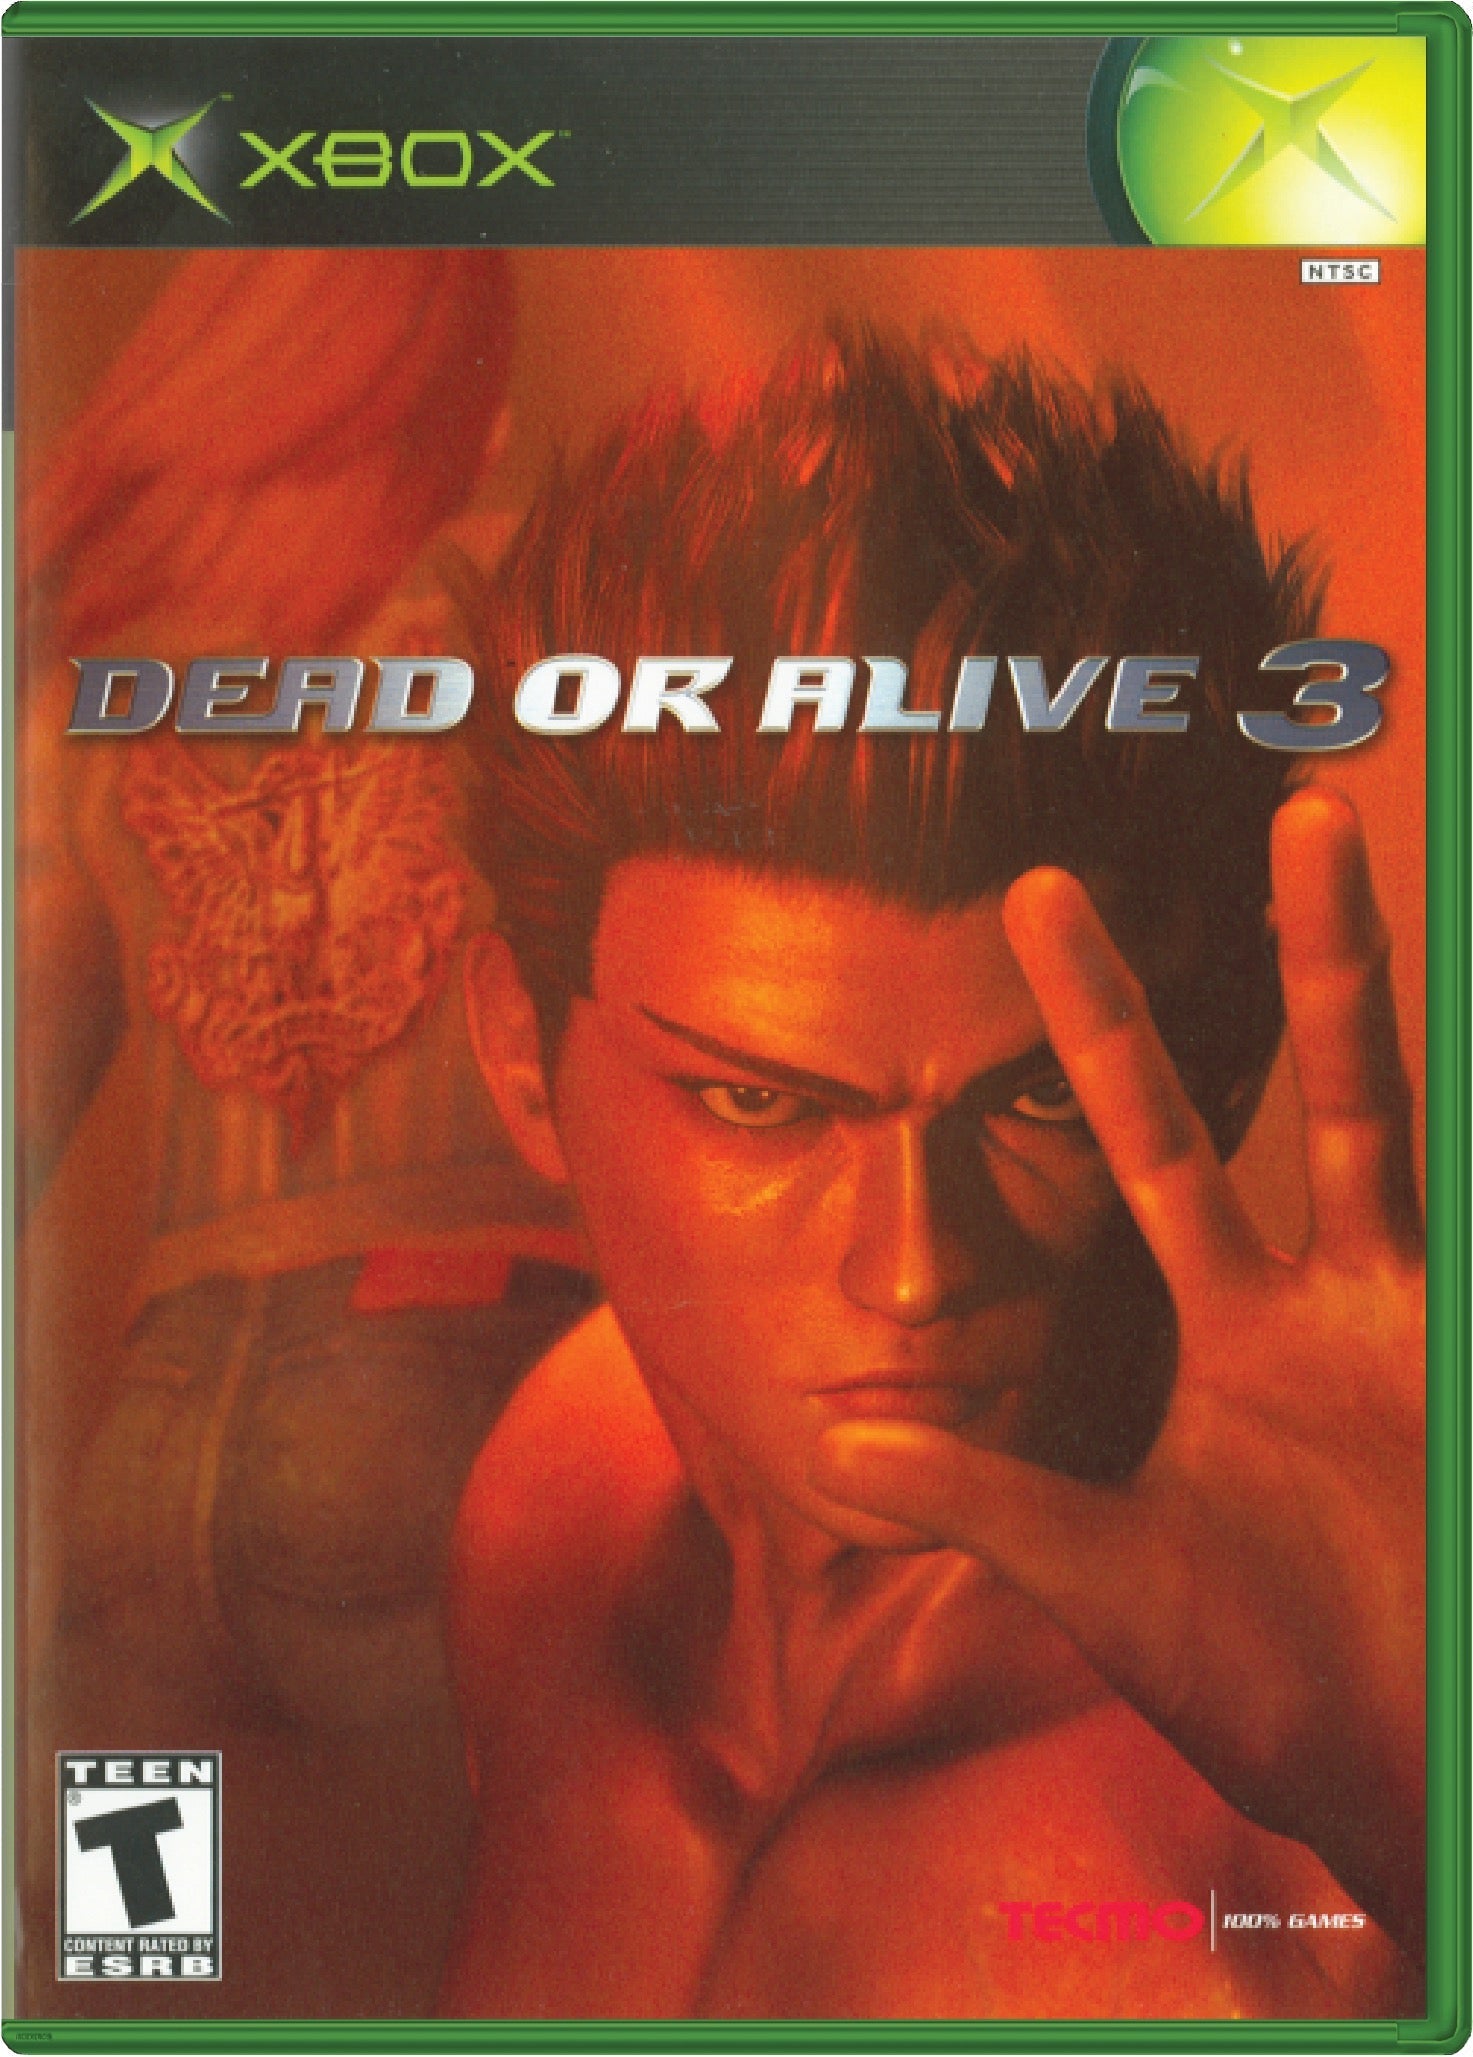 Dead or Alive 3 Cover Art